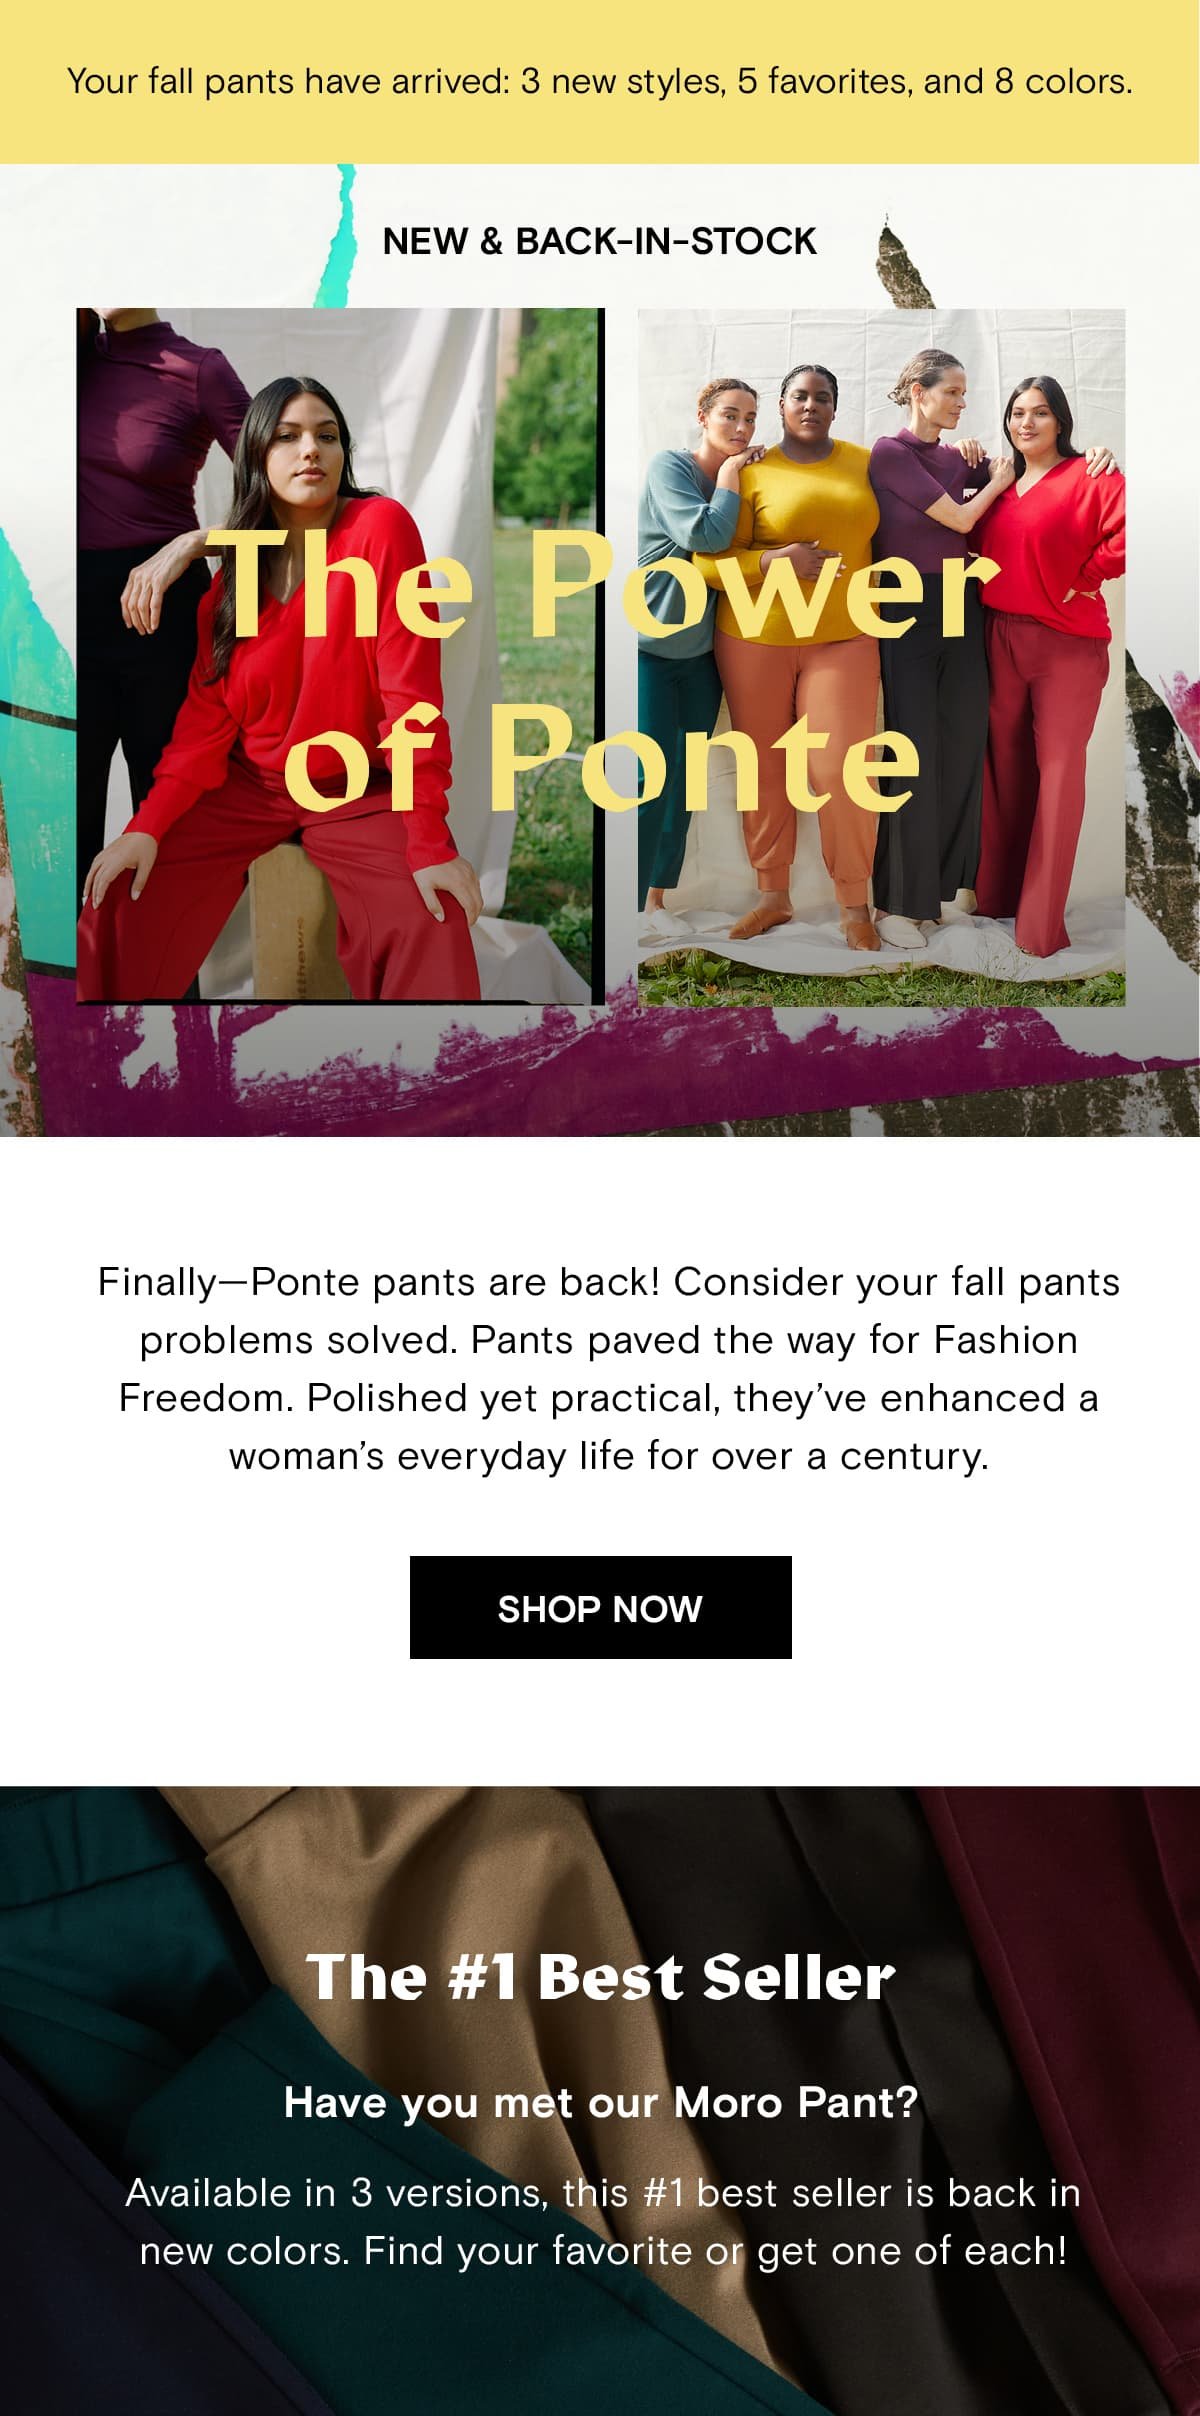 Finally—Ponte pants are back! Consider your fall pants problems solved. Pants paved the way for Fashion Freedom. Polished yet practical, they’ve enhanced a woman’s everyday life for over a century.